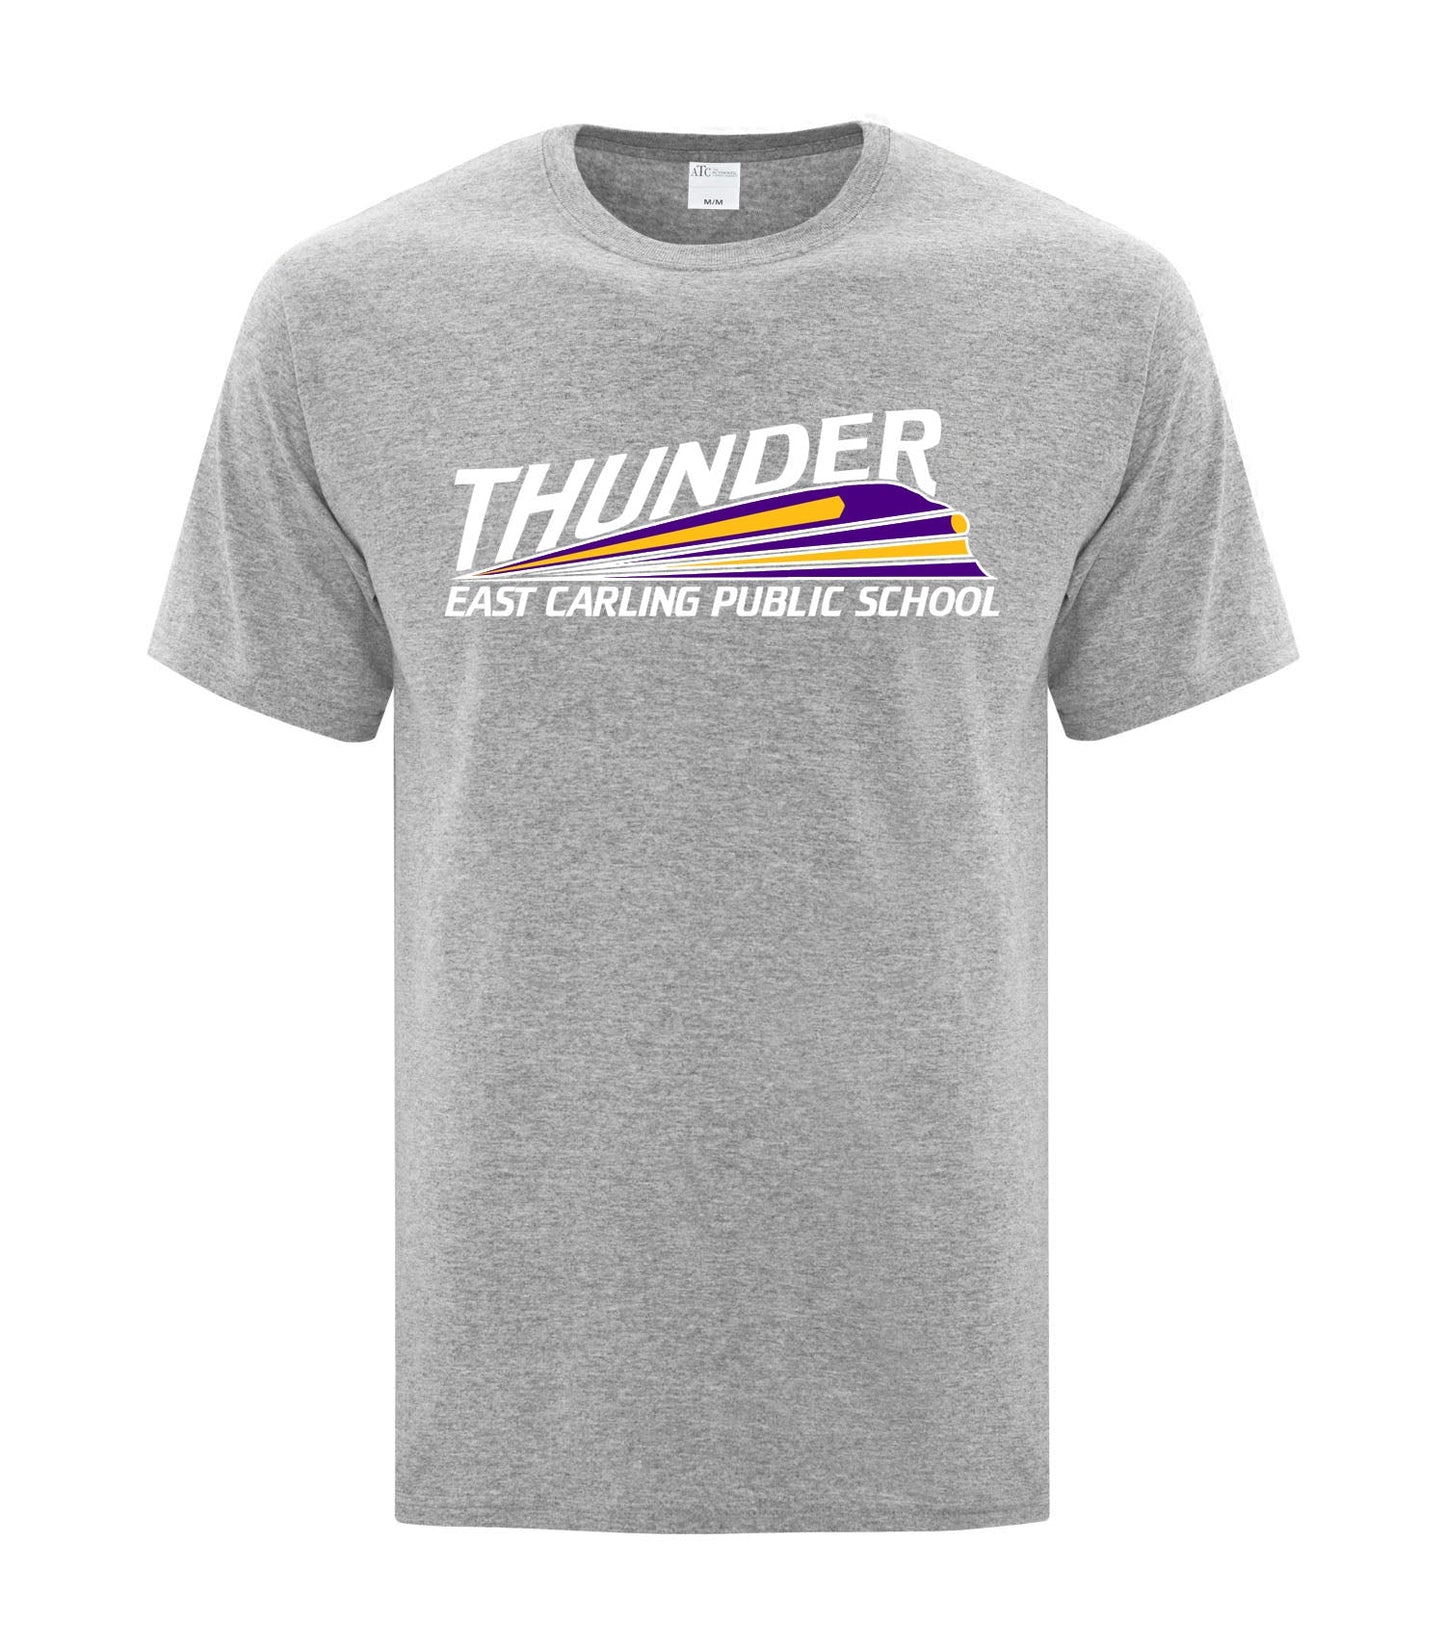 East Carling Thunder Adult Cotton T-Shirt